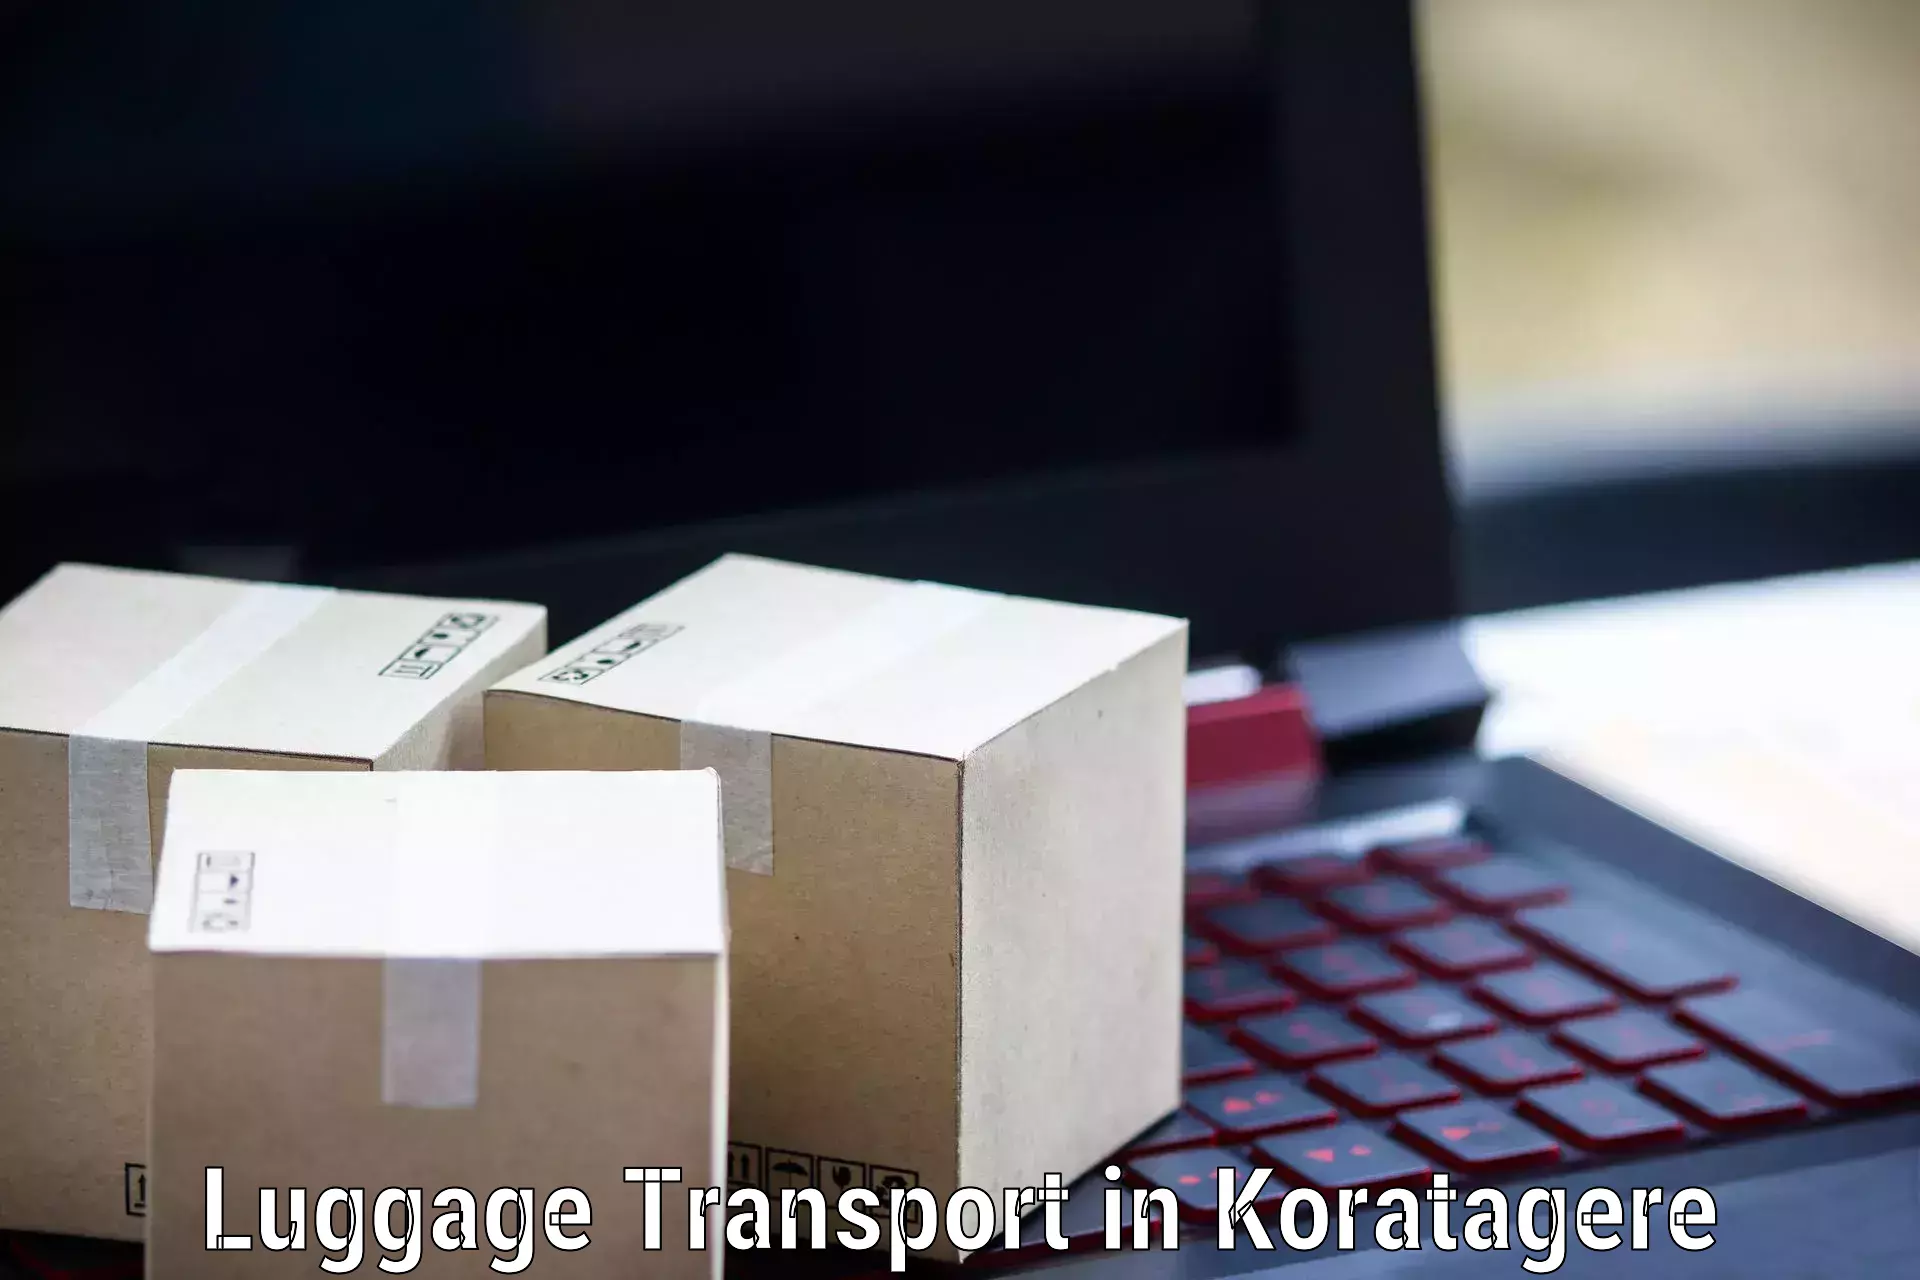 Domestic luggage transport in Koratagere